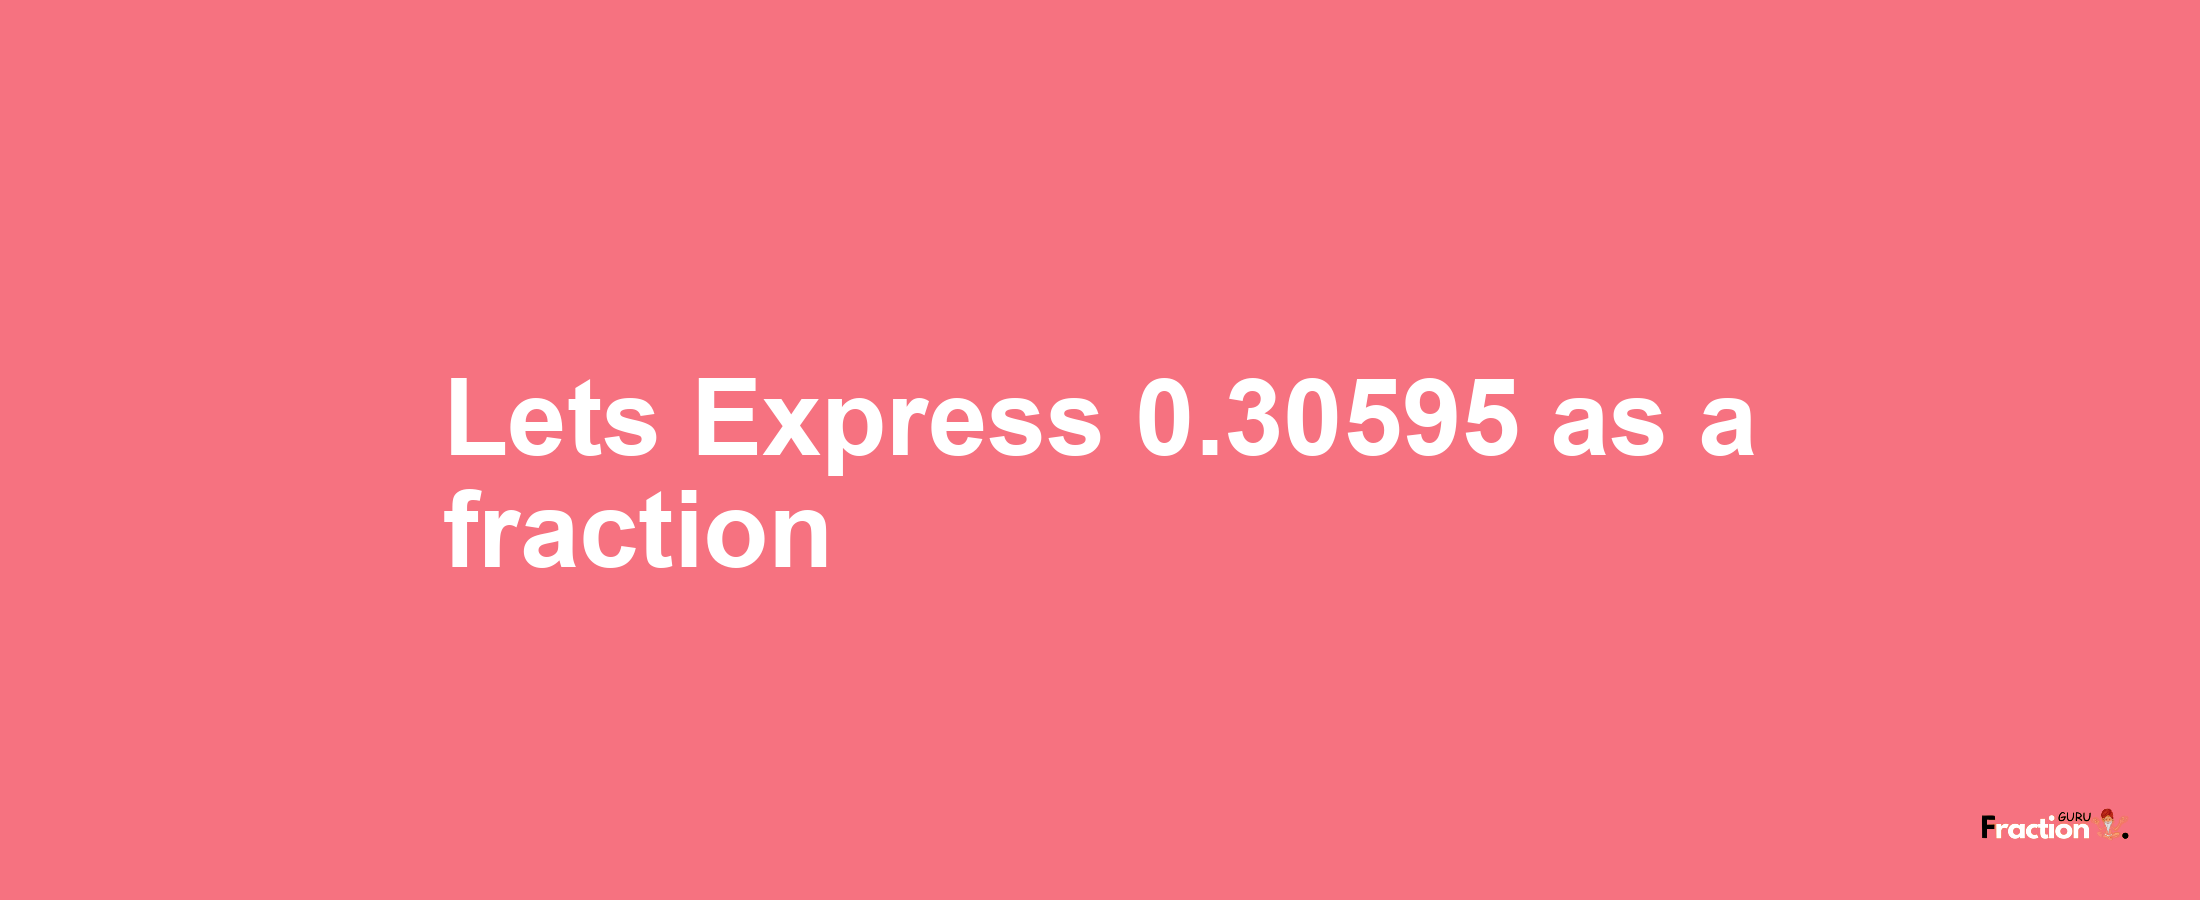 Lets Express 0.30595 as afraction